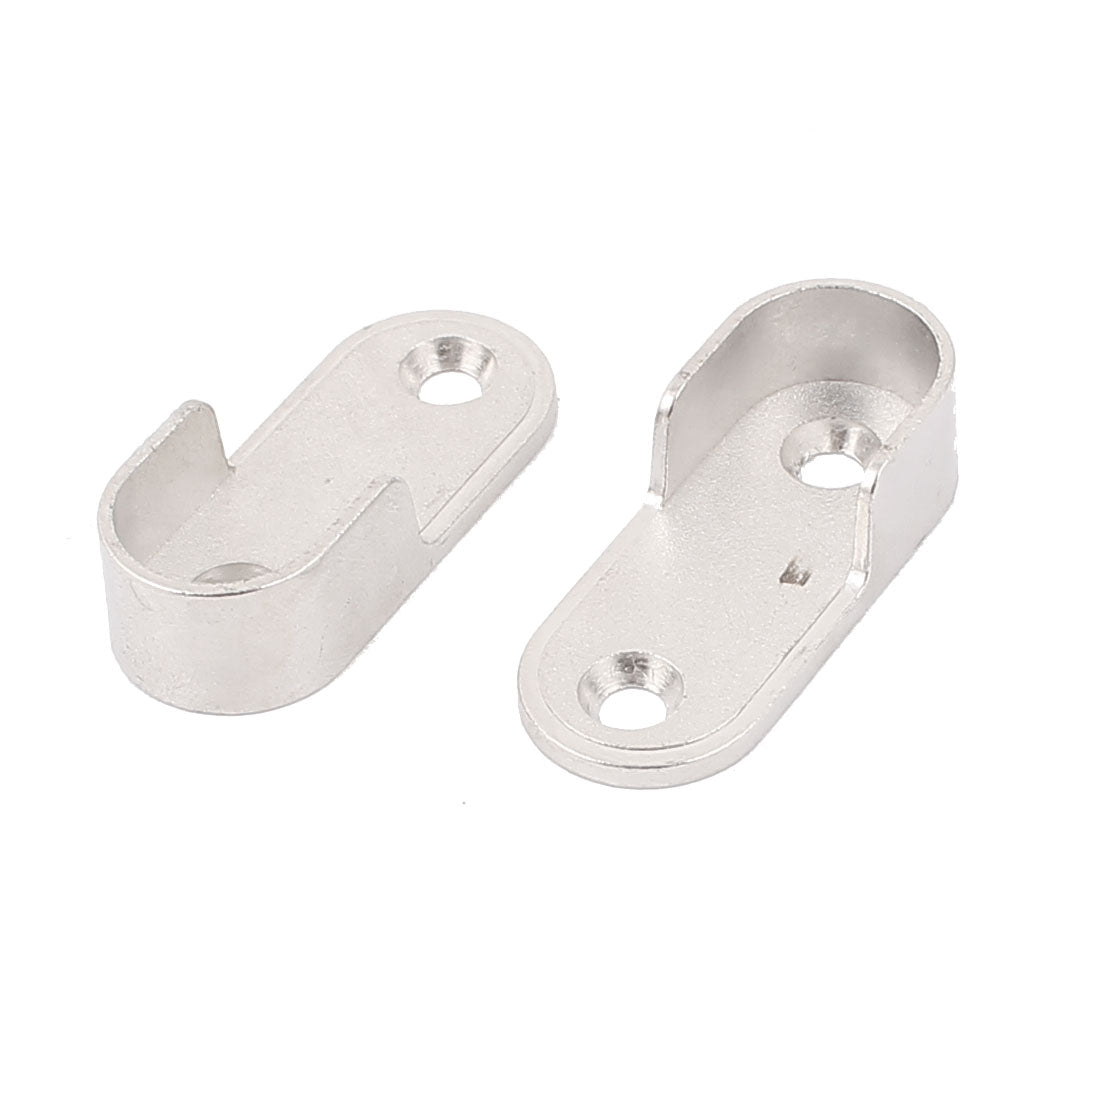 uxcell Uxcell Oval Wardrobe Hanging Rail Rod End Socket Bracket Support Silver Tone 2pcs